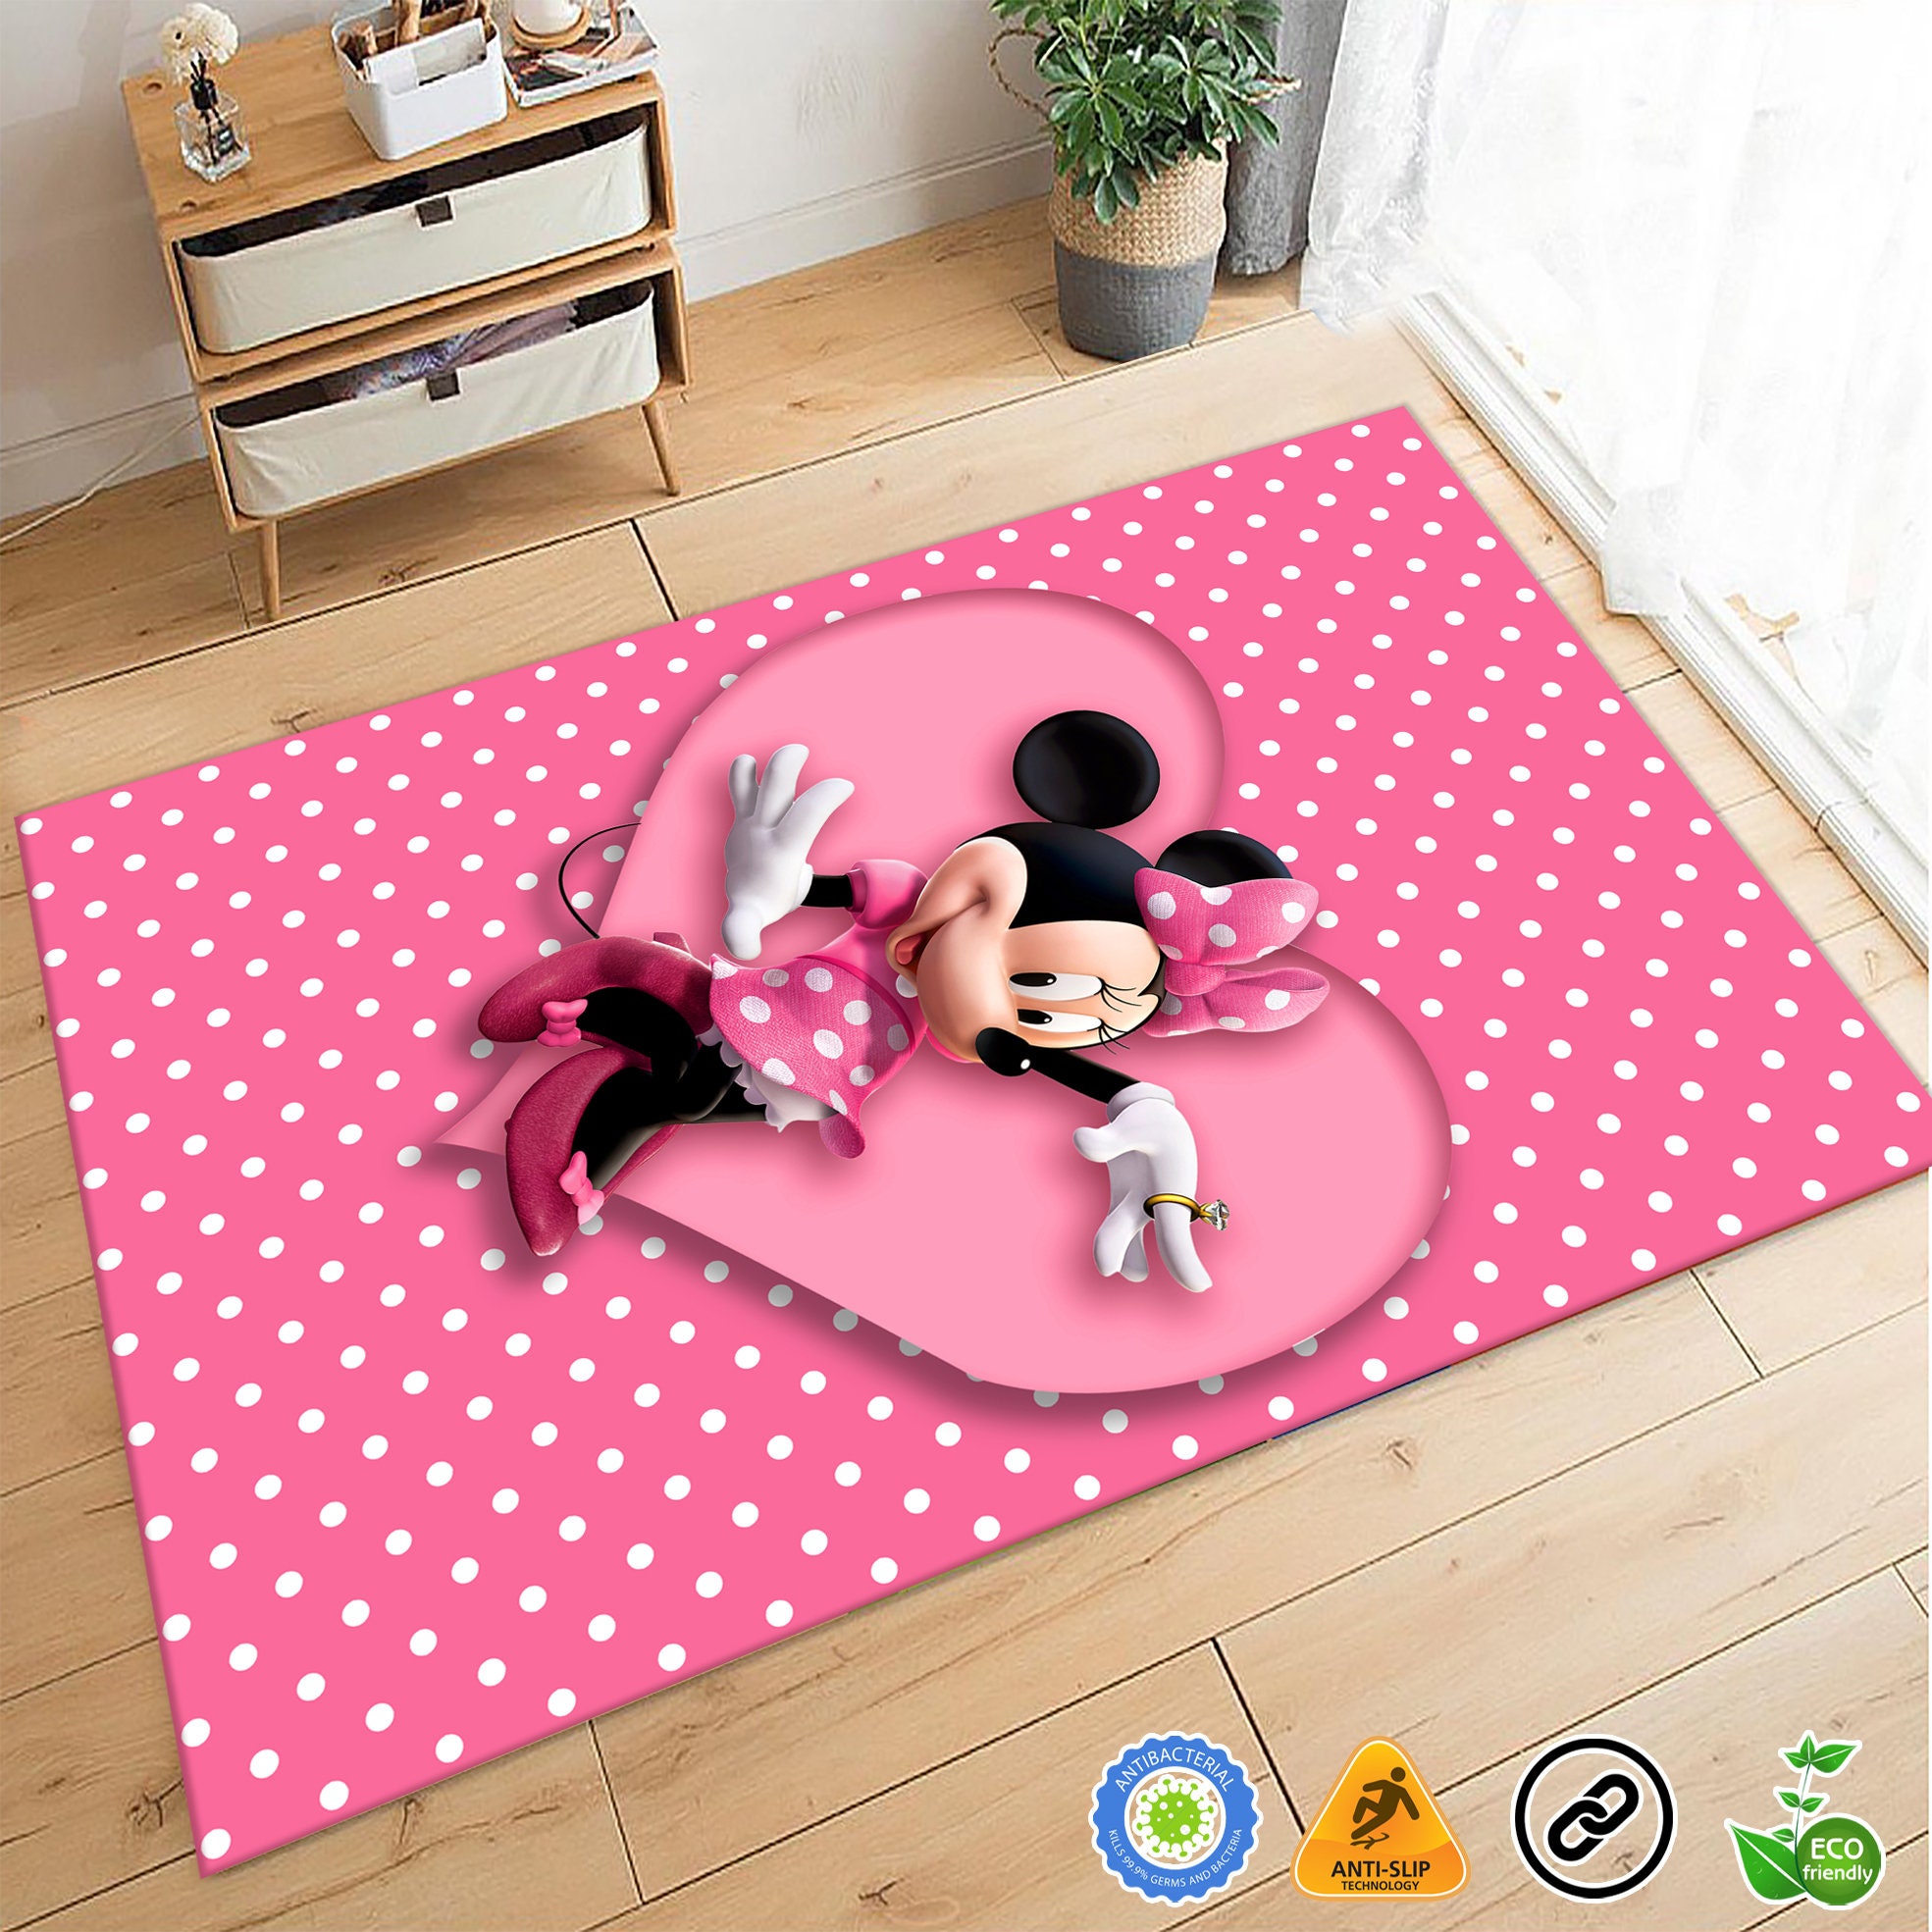 Discover Mickey Mouse Carpet, Minnie Mouse Carpet, Cute Carpet, Kids Room Decor, Baby Room Decor, Disney Rugs